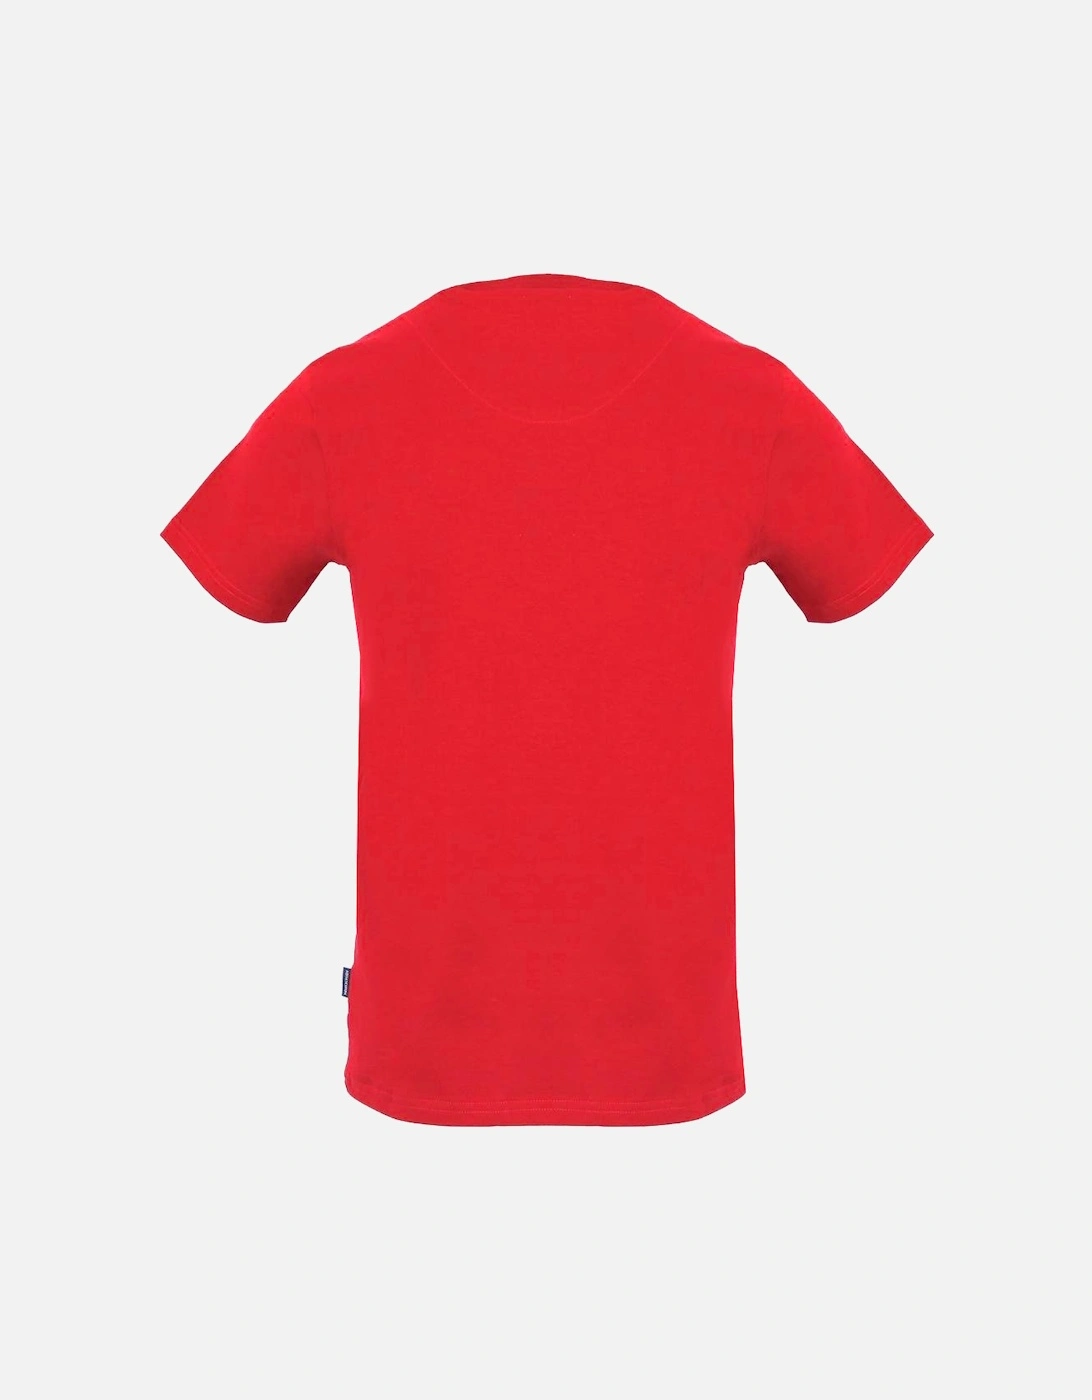 Distorted Logo Red T-Shirt